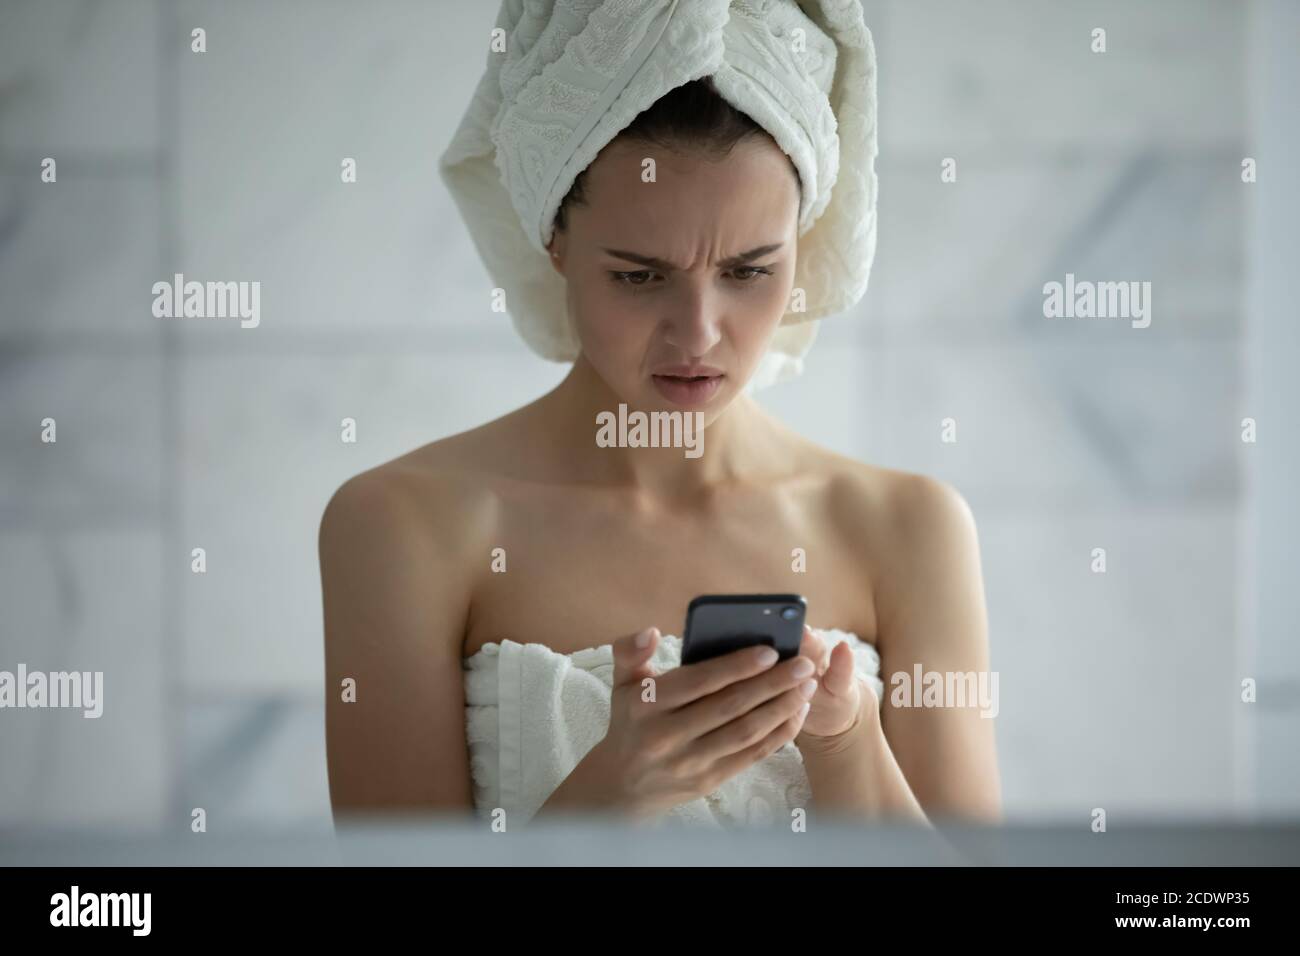 Unhappy young woman reading bad news in message in bathroom Stock Photo